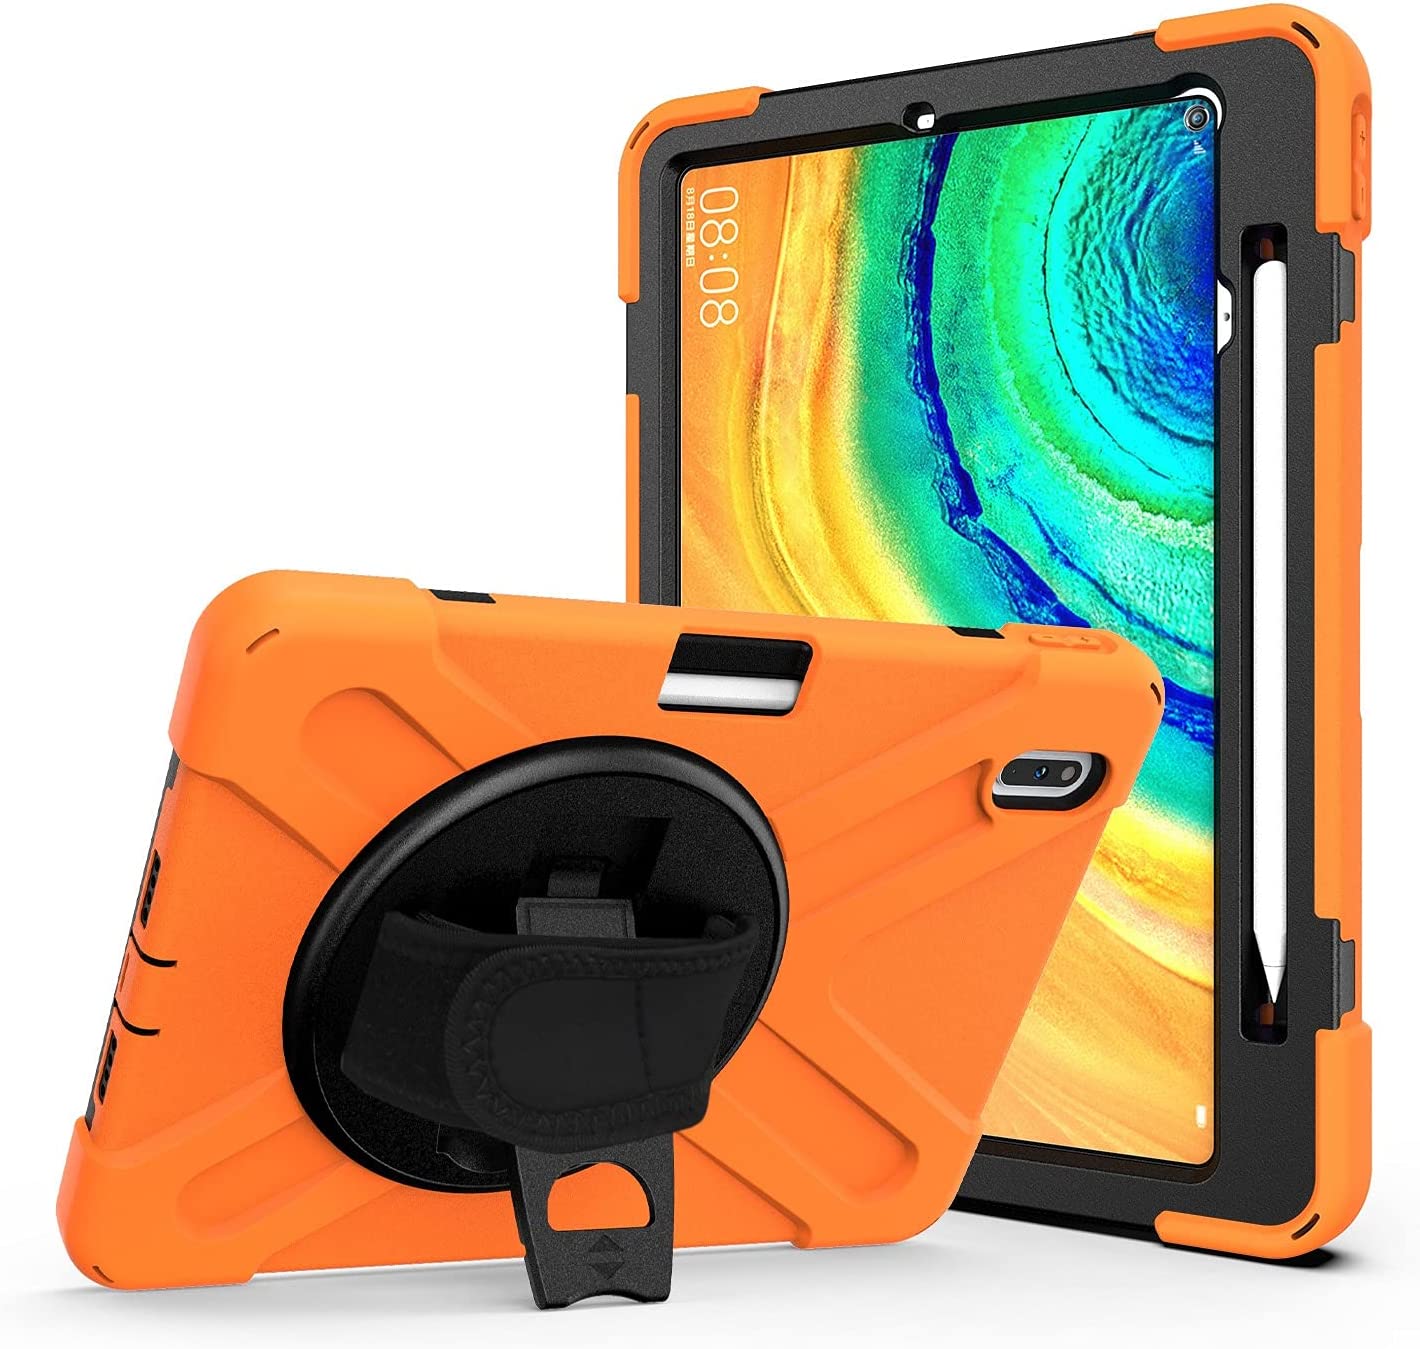 Table PC Case Protective Shell Tablet Cover Compatible with Huawei Matepad Pro 10.8/10.8 5G,Kids Full Body Shockproof Tablet Case with Hand Strap/Shoulder Strap Rotating Kickstand Protective Shell (C